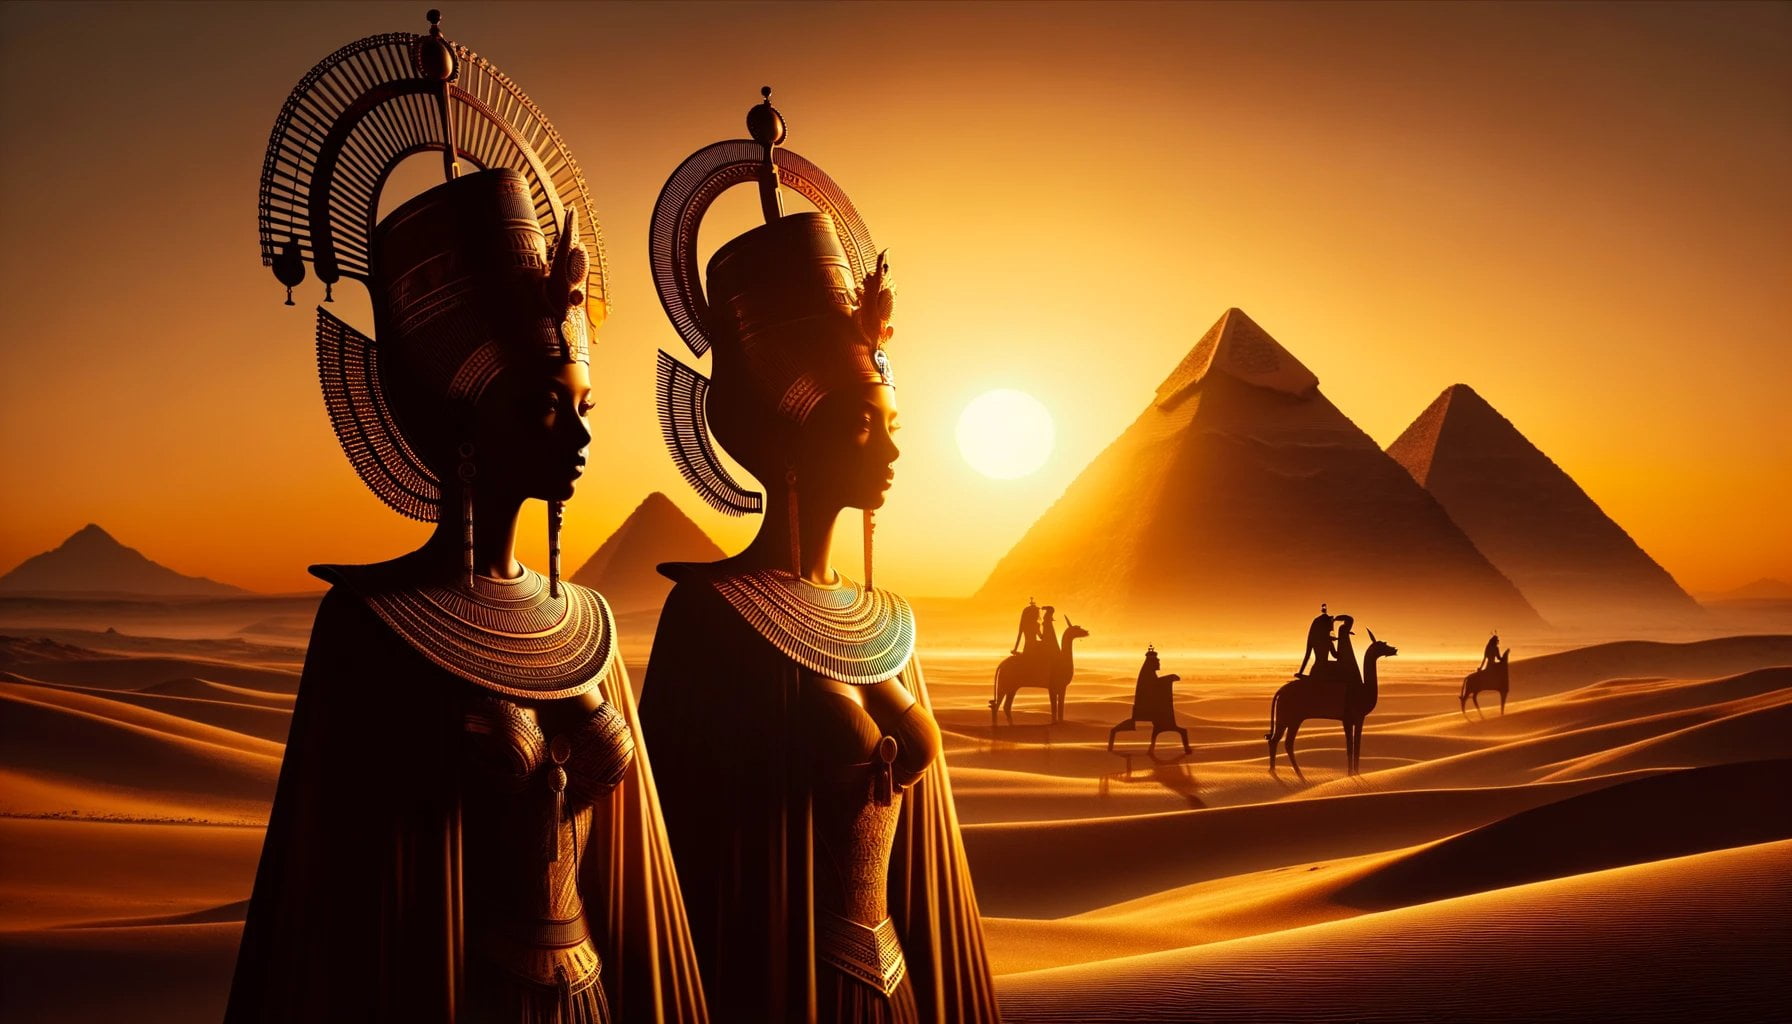 ancient queens of egypt 1 1